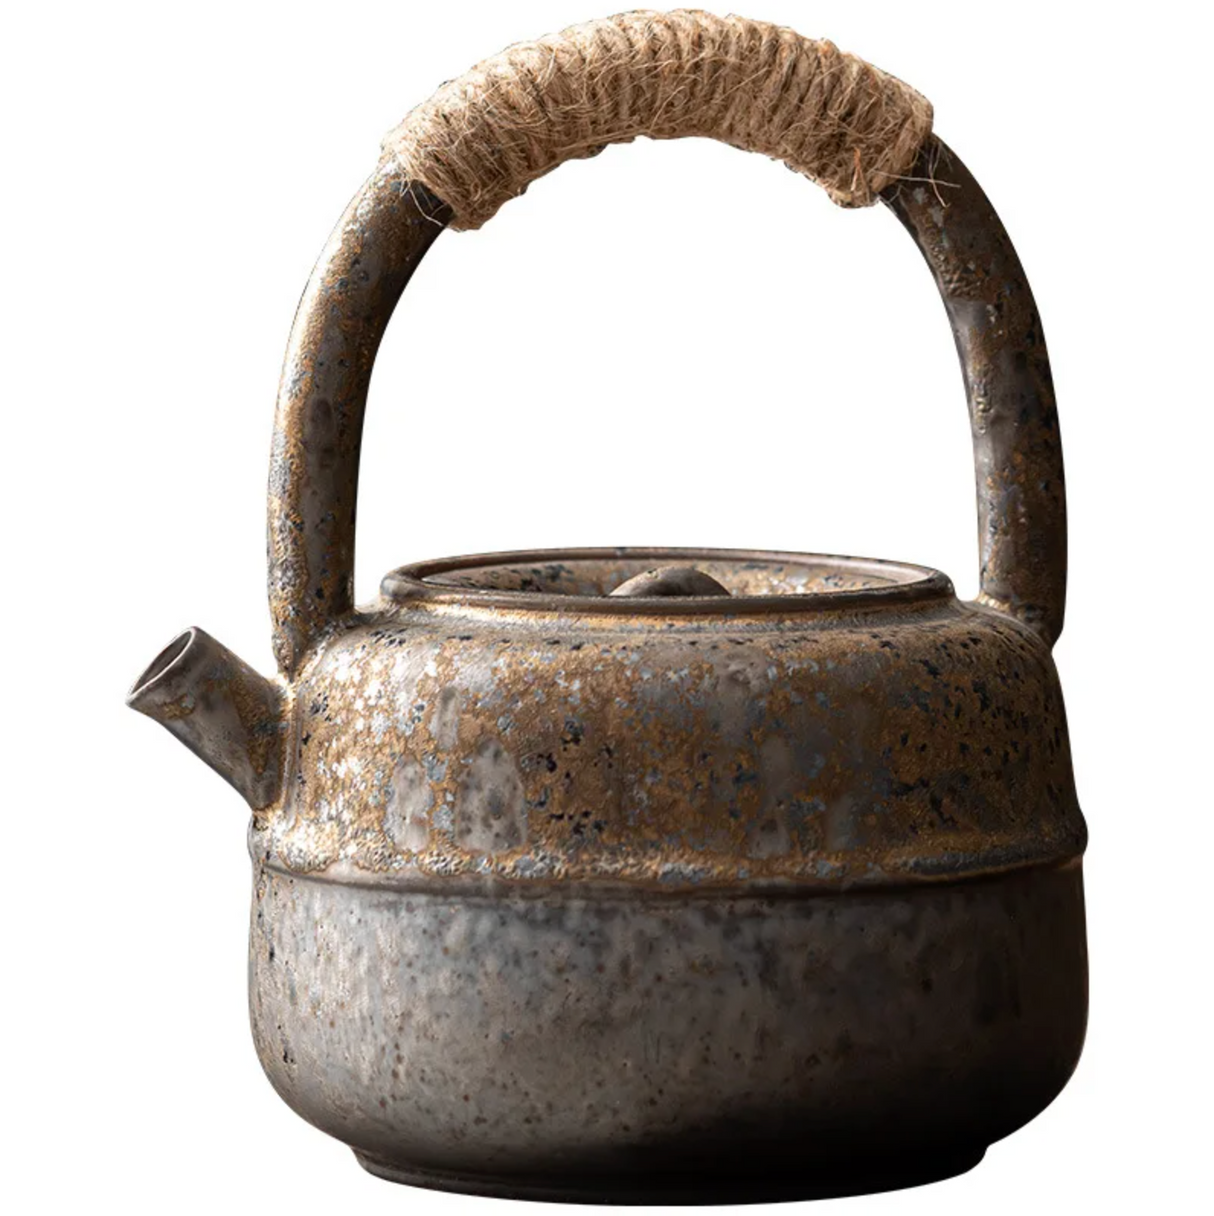 Very old style Japanese teapot